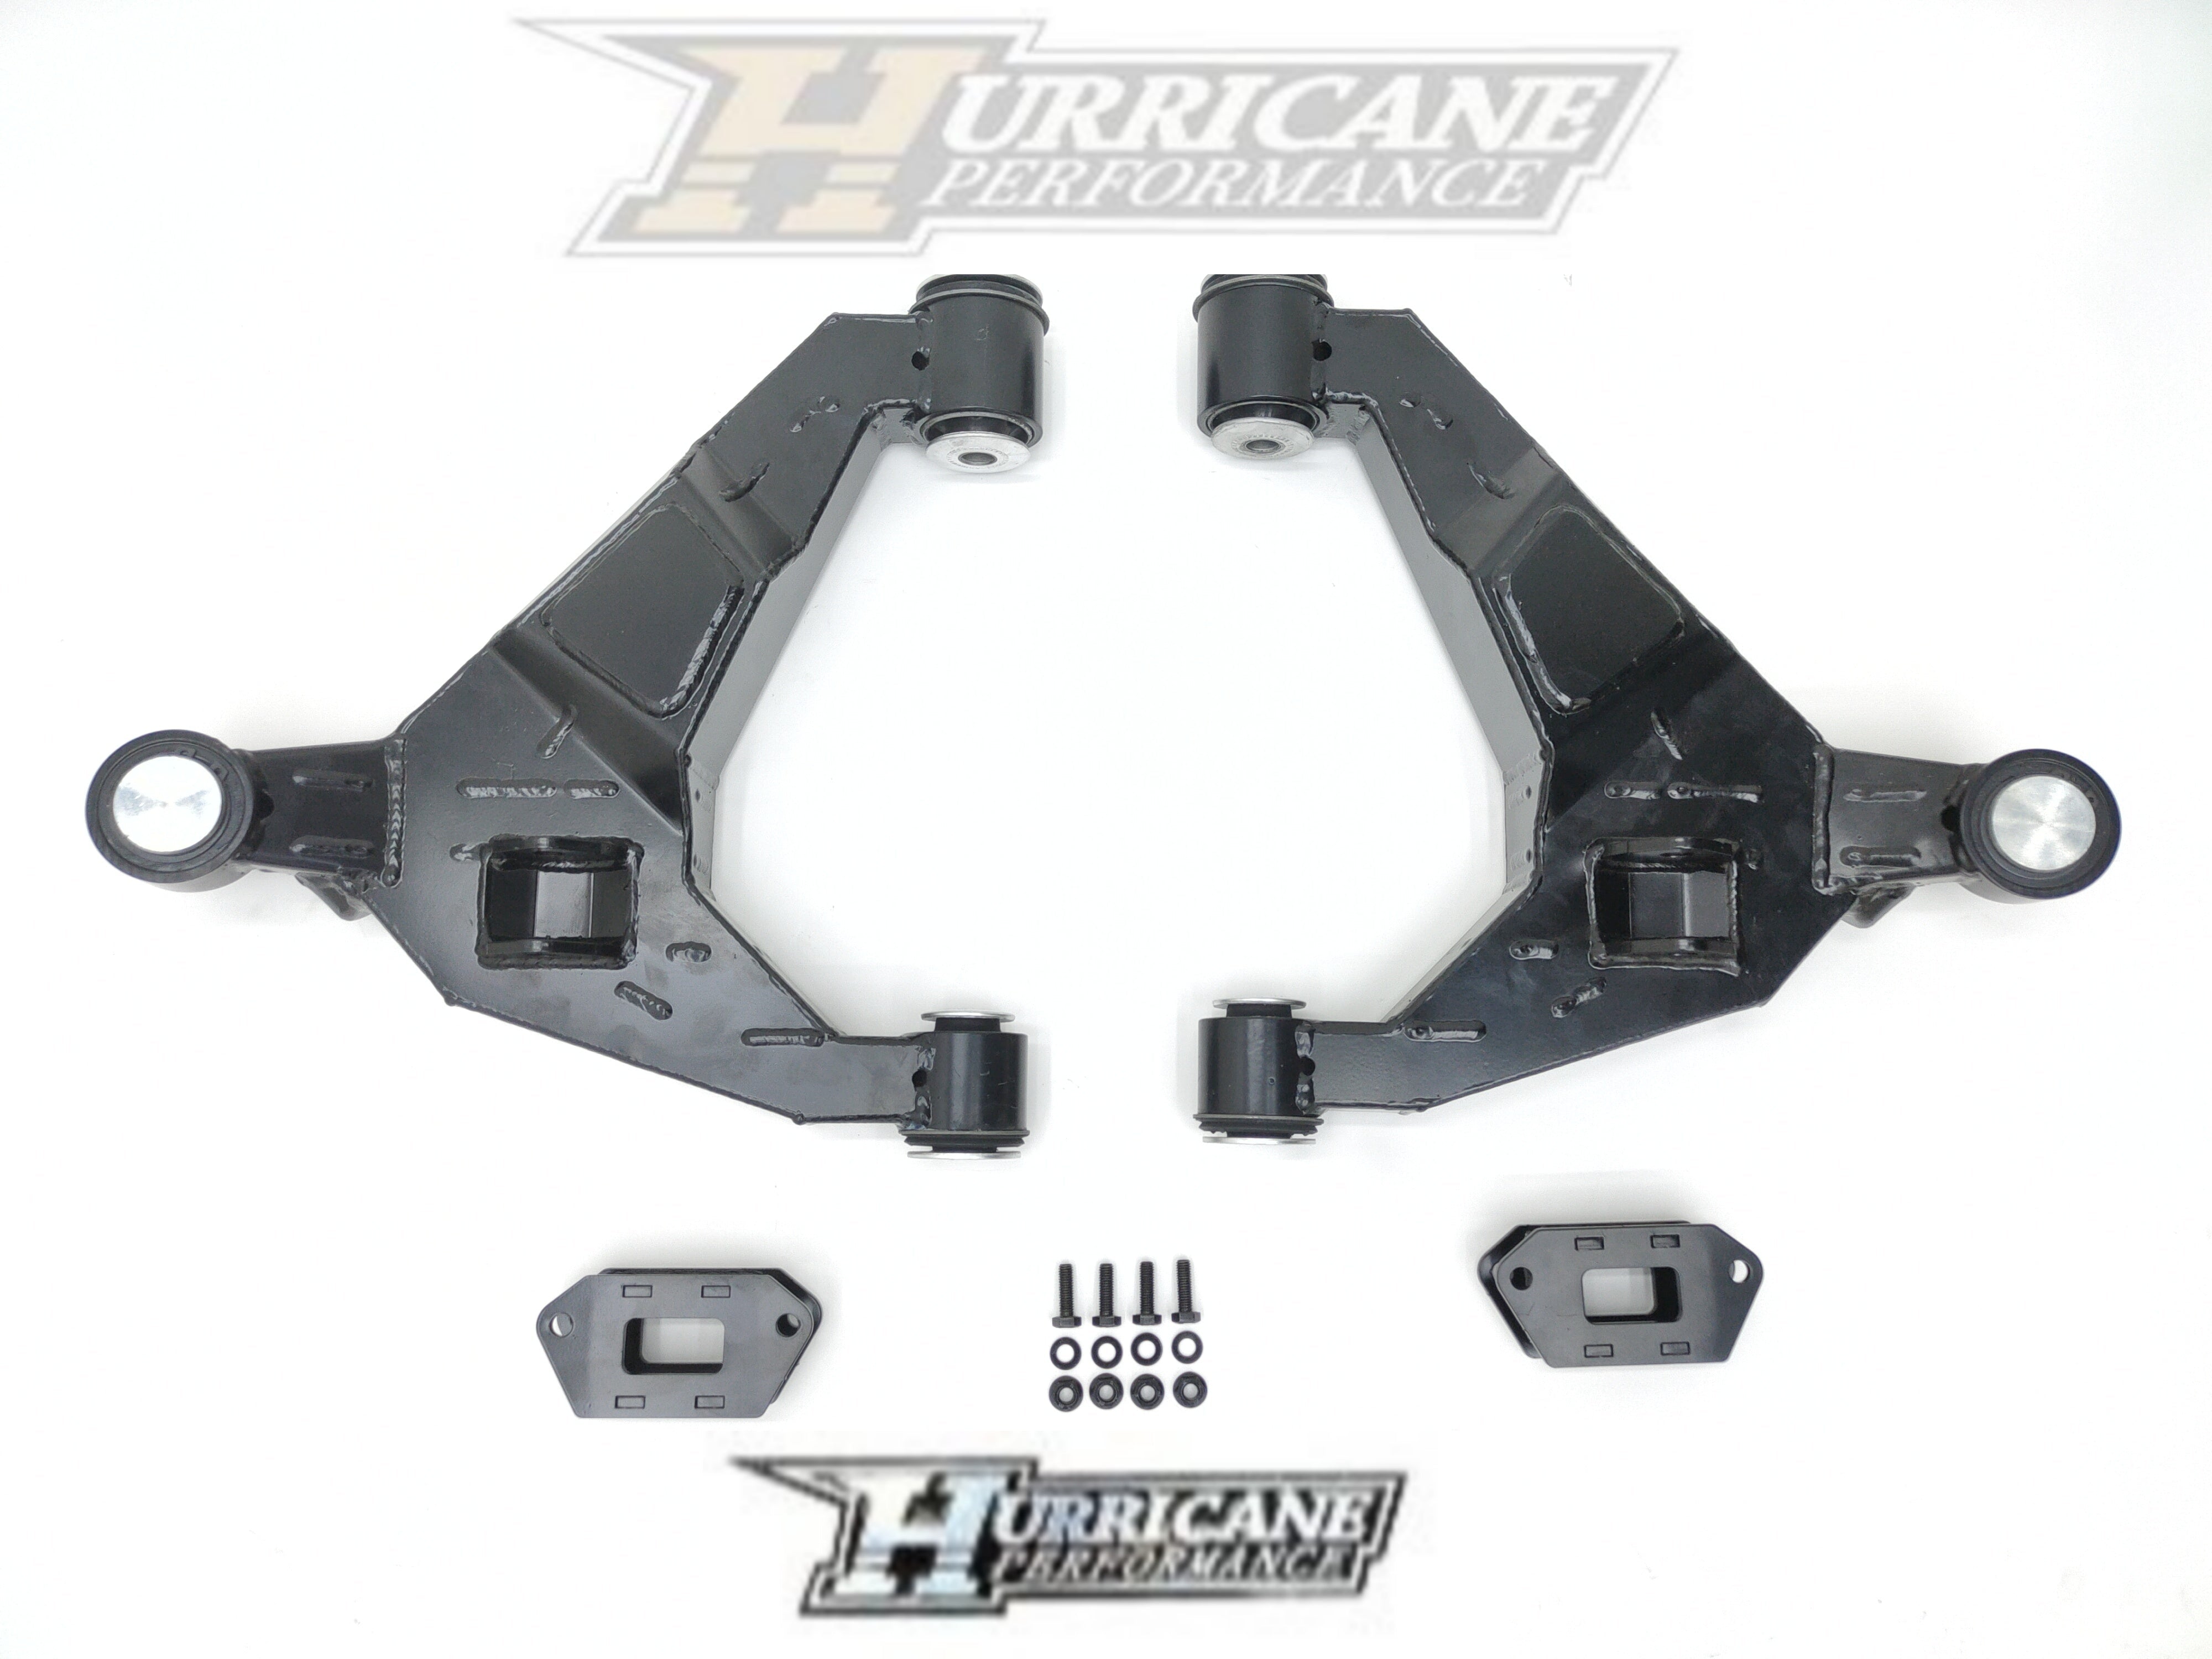 HURRICANE PERFORMANCE FRONT LOWER CONTROL ARMS FOR FJ CRUISER